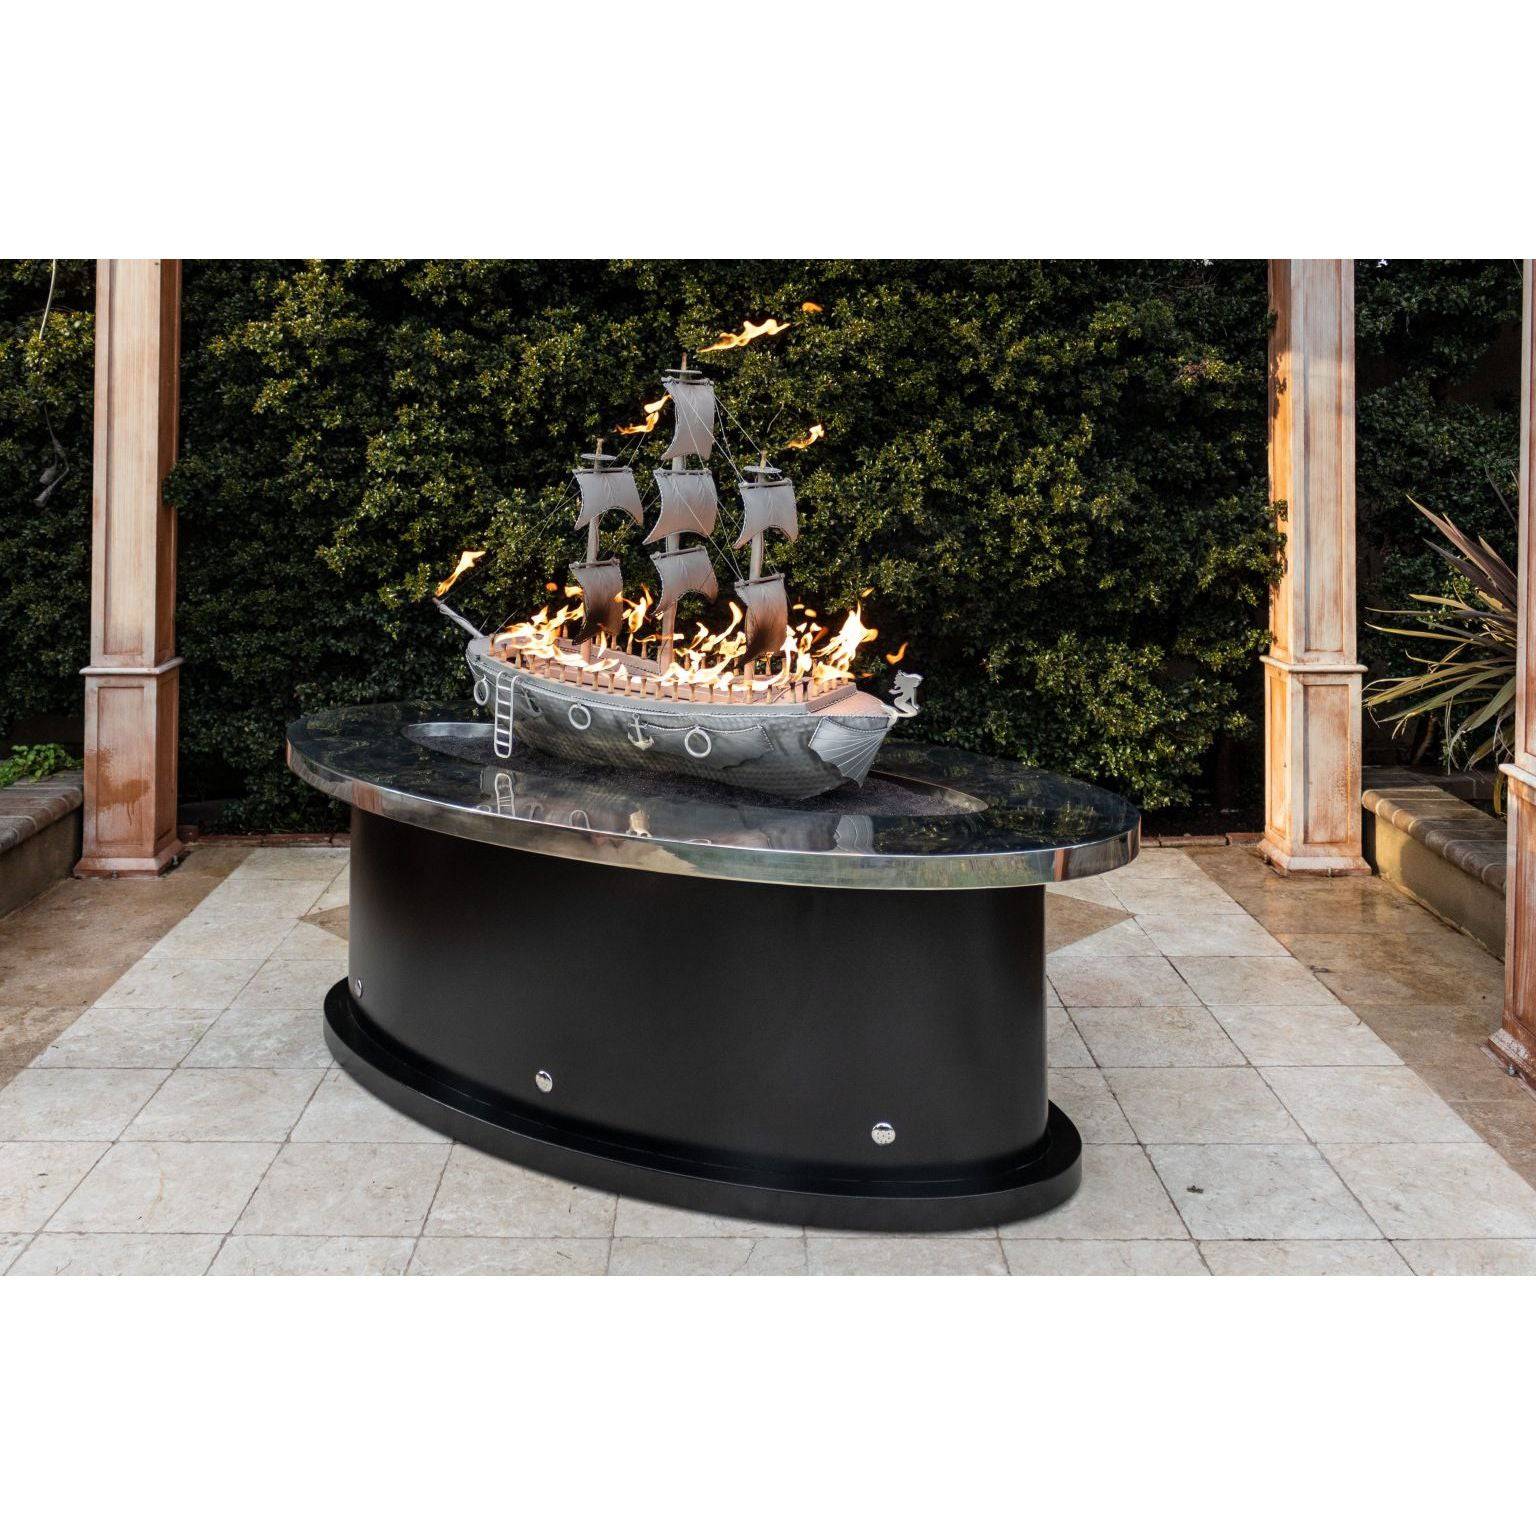 The Outdoor Plus La Pinta Fire Table Stainless Steel Top OPT-PNT72 - Serenity Provision